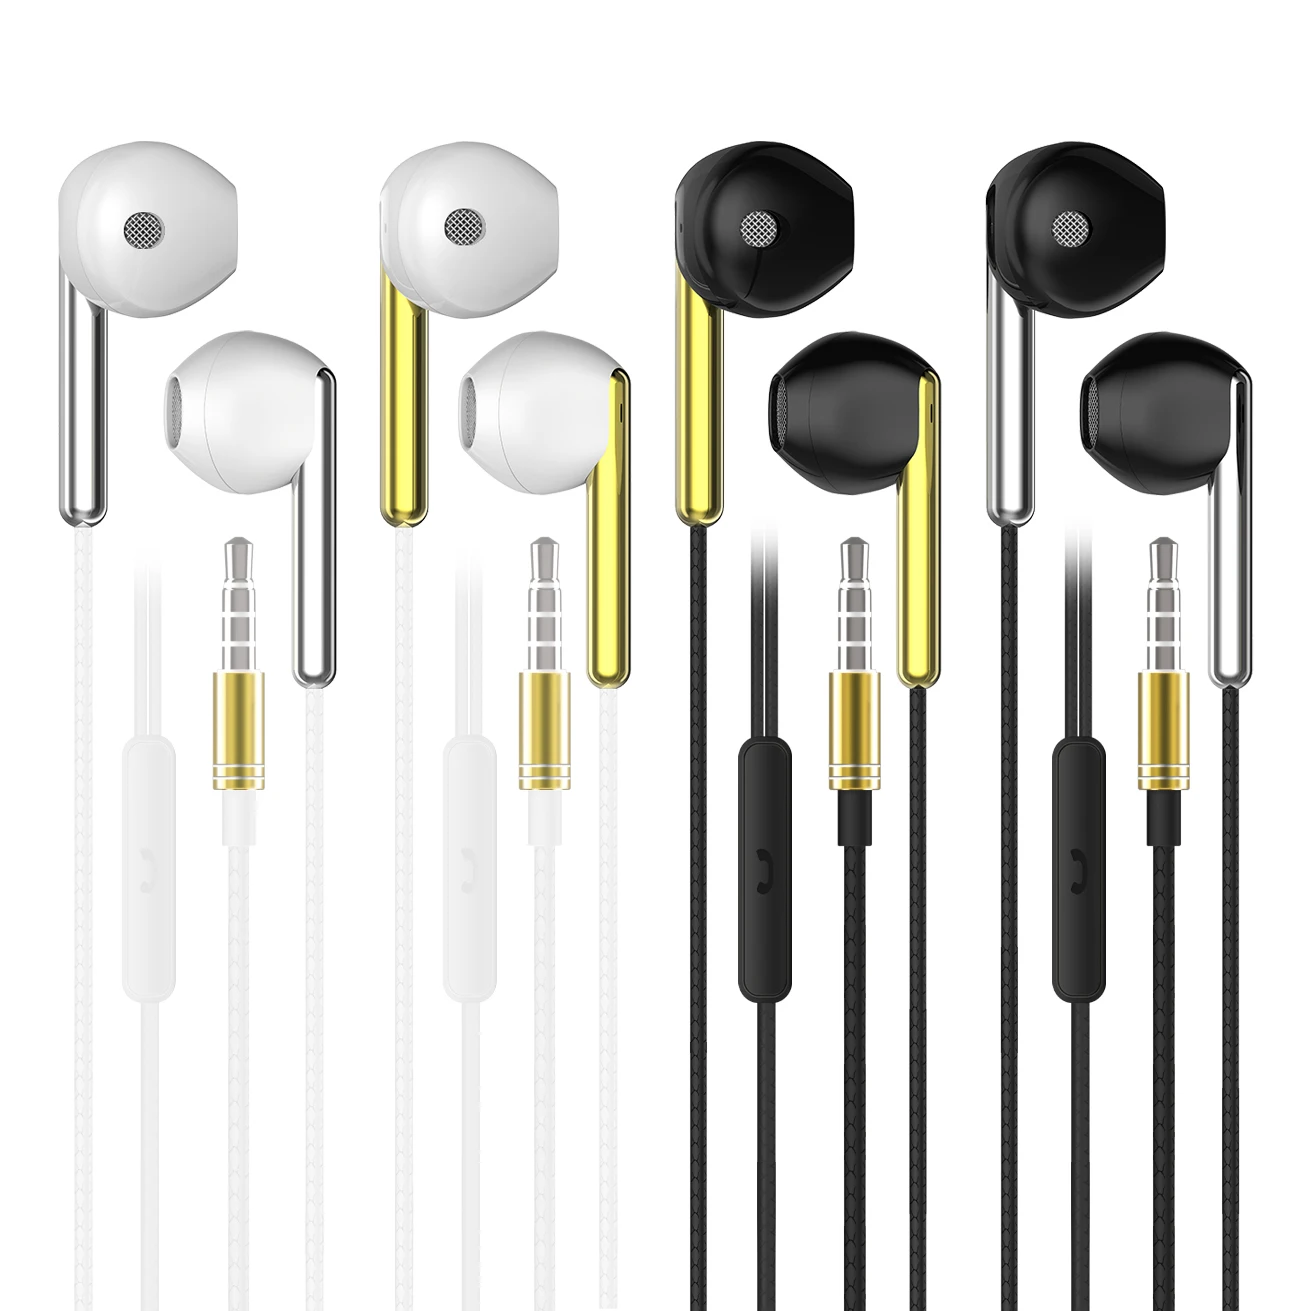 

Wired Earphone Headphone Handsfree Mic 3.5mm Stereo Sound gaming Headset Earbuds Earpieces Microphone Noise Cancelling Earphones, Black/white